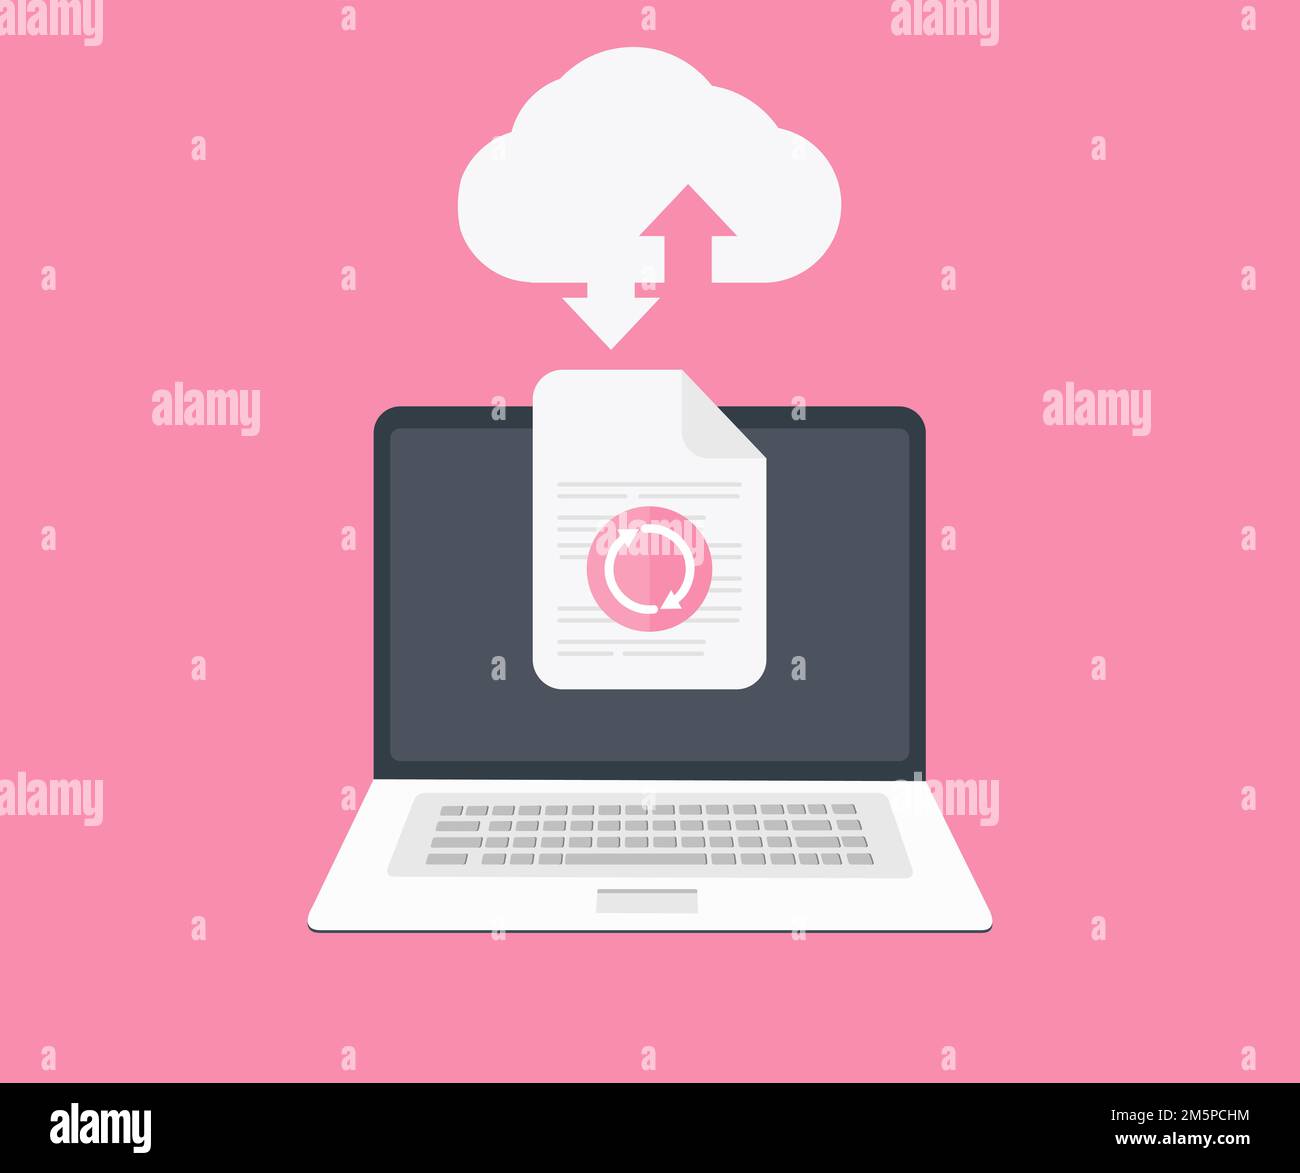 Cloud computing technology. Upload and download files, using laptop logo design. Big data, internet of things, business processes, various storage. Stock Vector